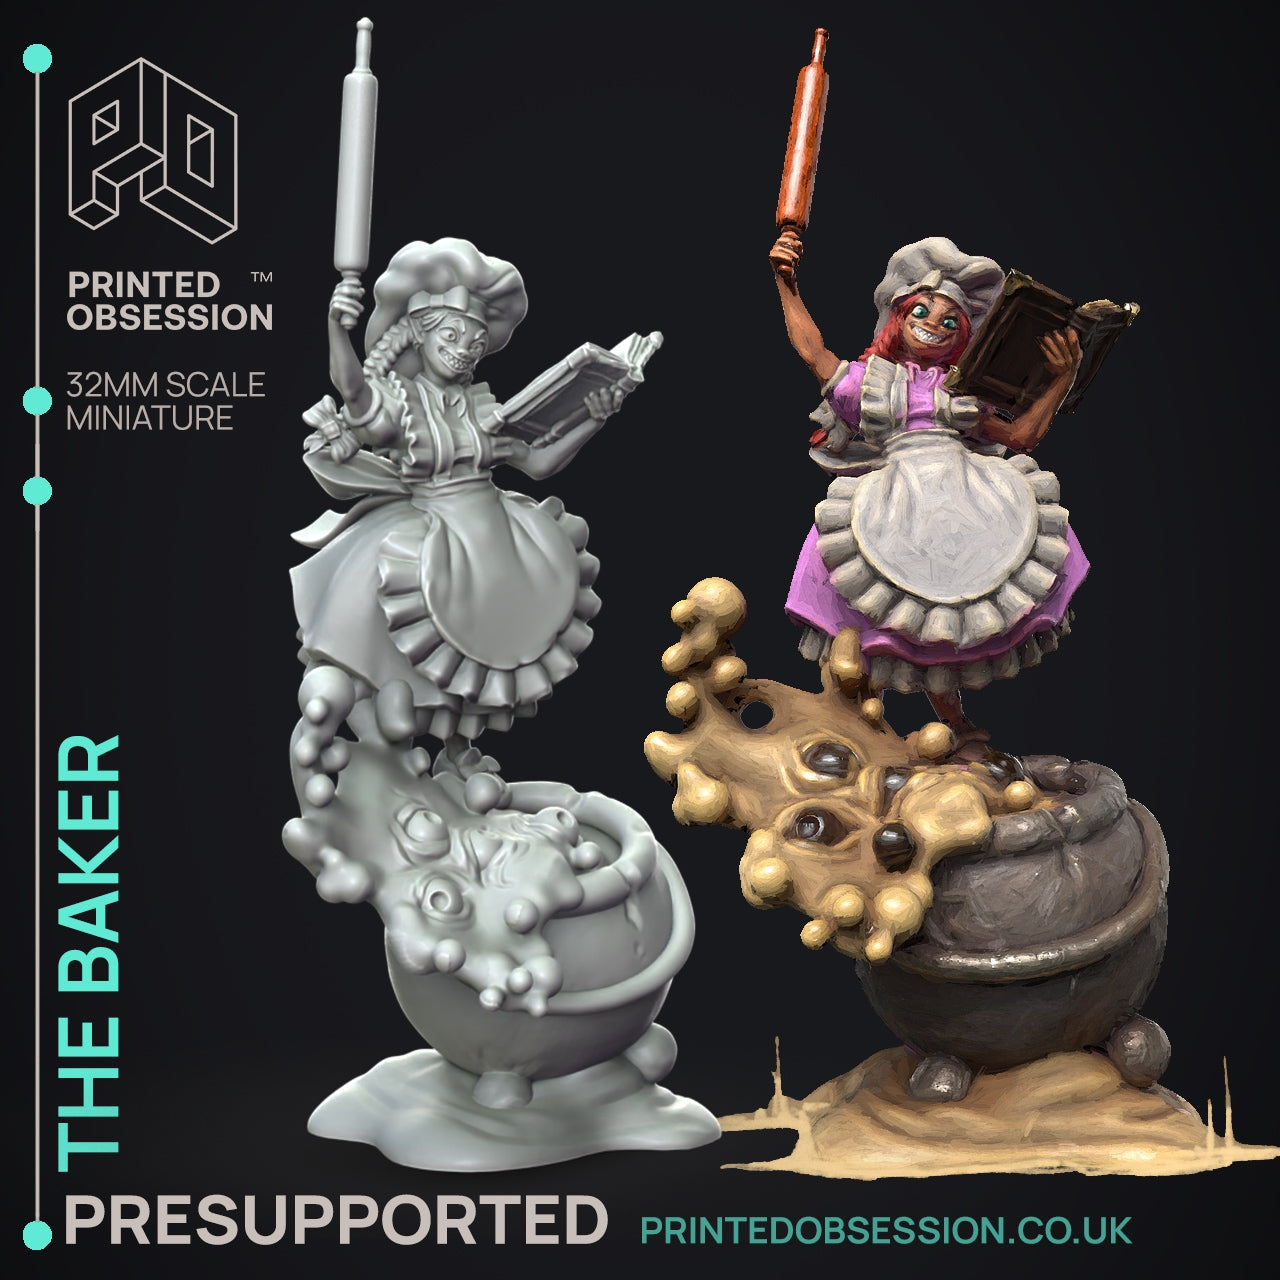 The Baker - The Possessed Bakery - The Printed Obsession - Table-top mini, 3D Printed Collectable for painting and playing!